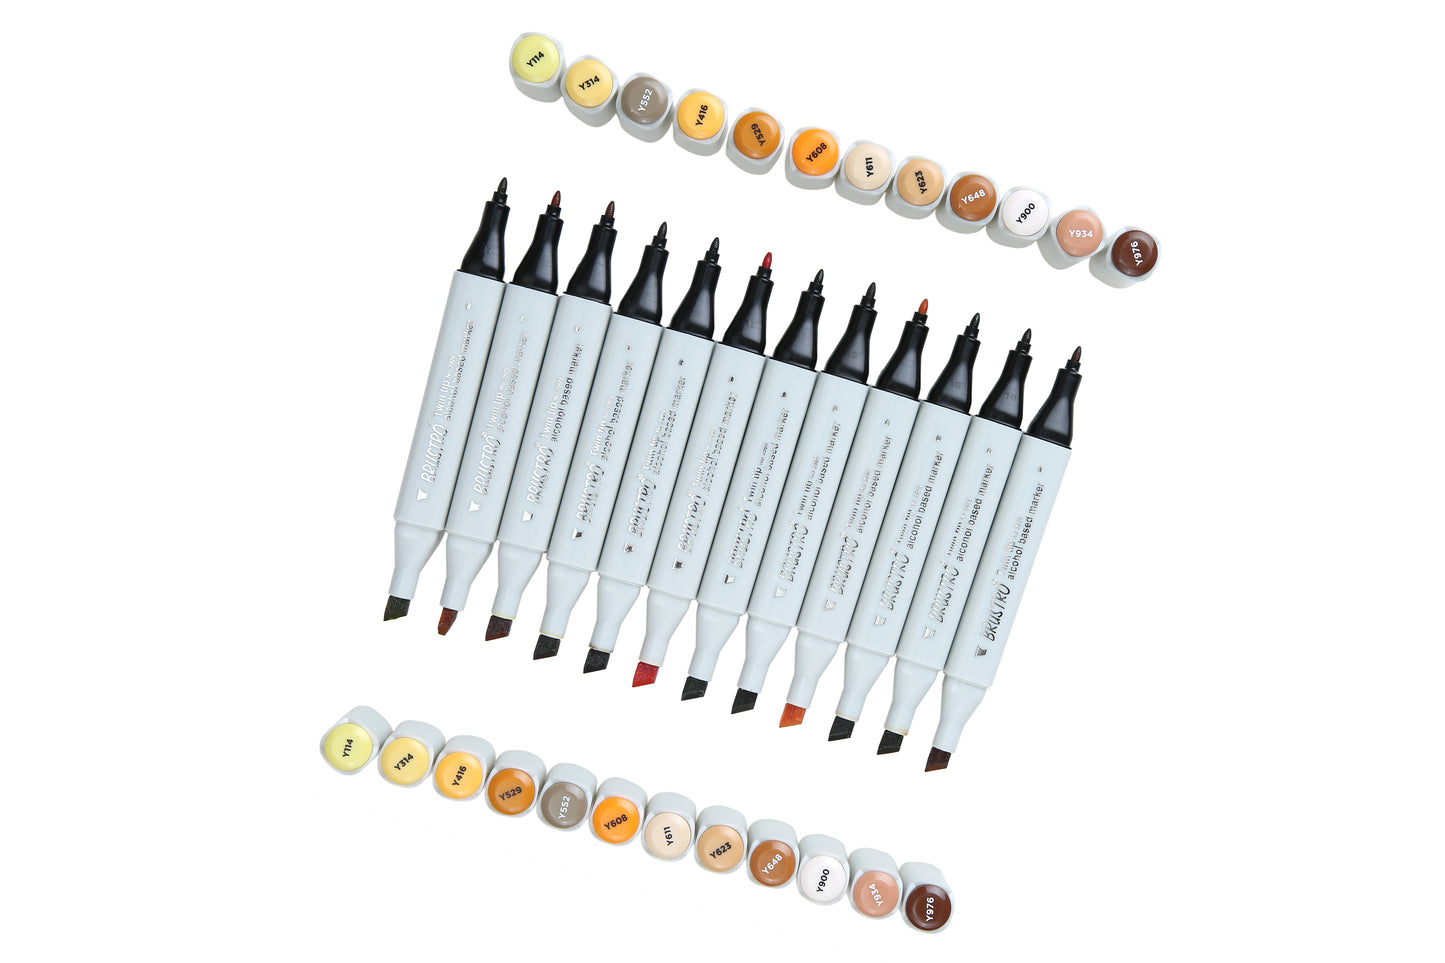 Brustro Twin Tip Alcohol Based Marker Sets Earth Tone (12)